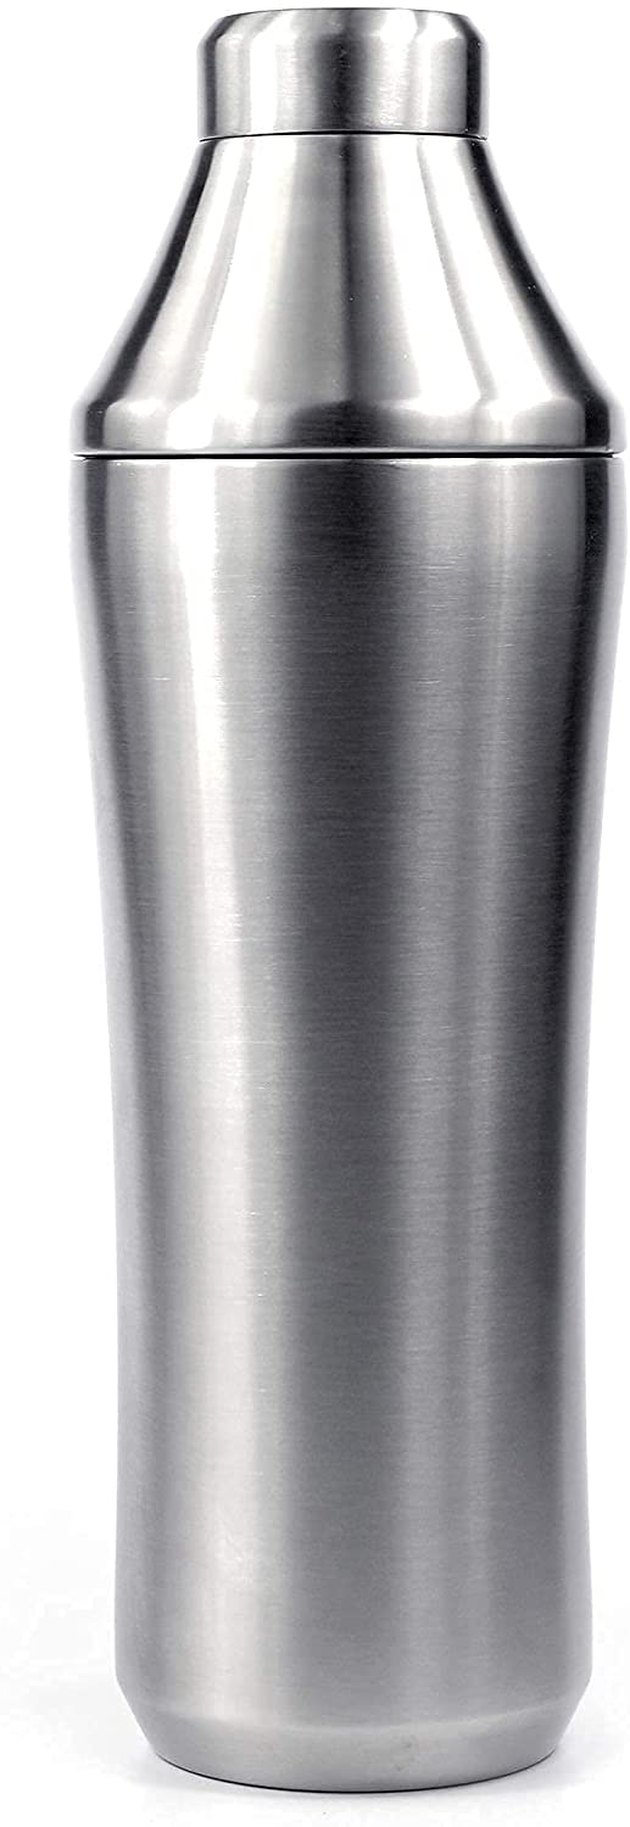 What doesn't this luxe cocktail shaker have? From its ergonomic design to it high-capacity measuring top, Elevated Craft truly thought of everything when making this kitchen tool. The shaker is also made entirely from professional-grade 18/8 stainless steel and fits up to 28 ounces of liquid.